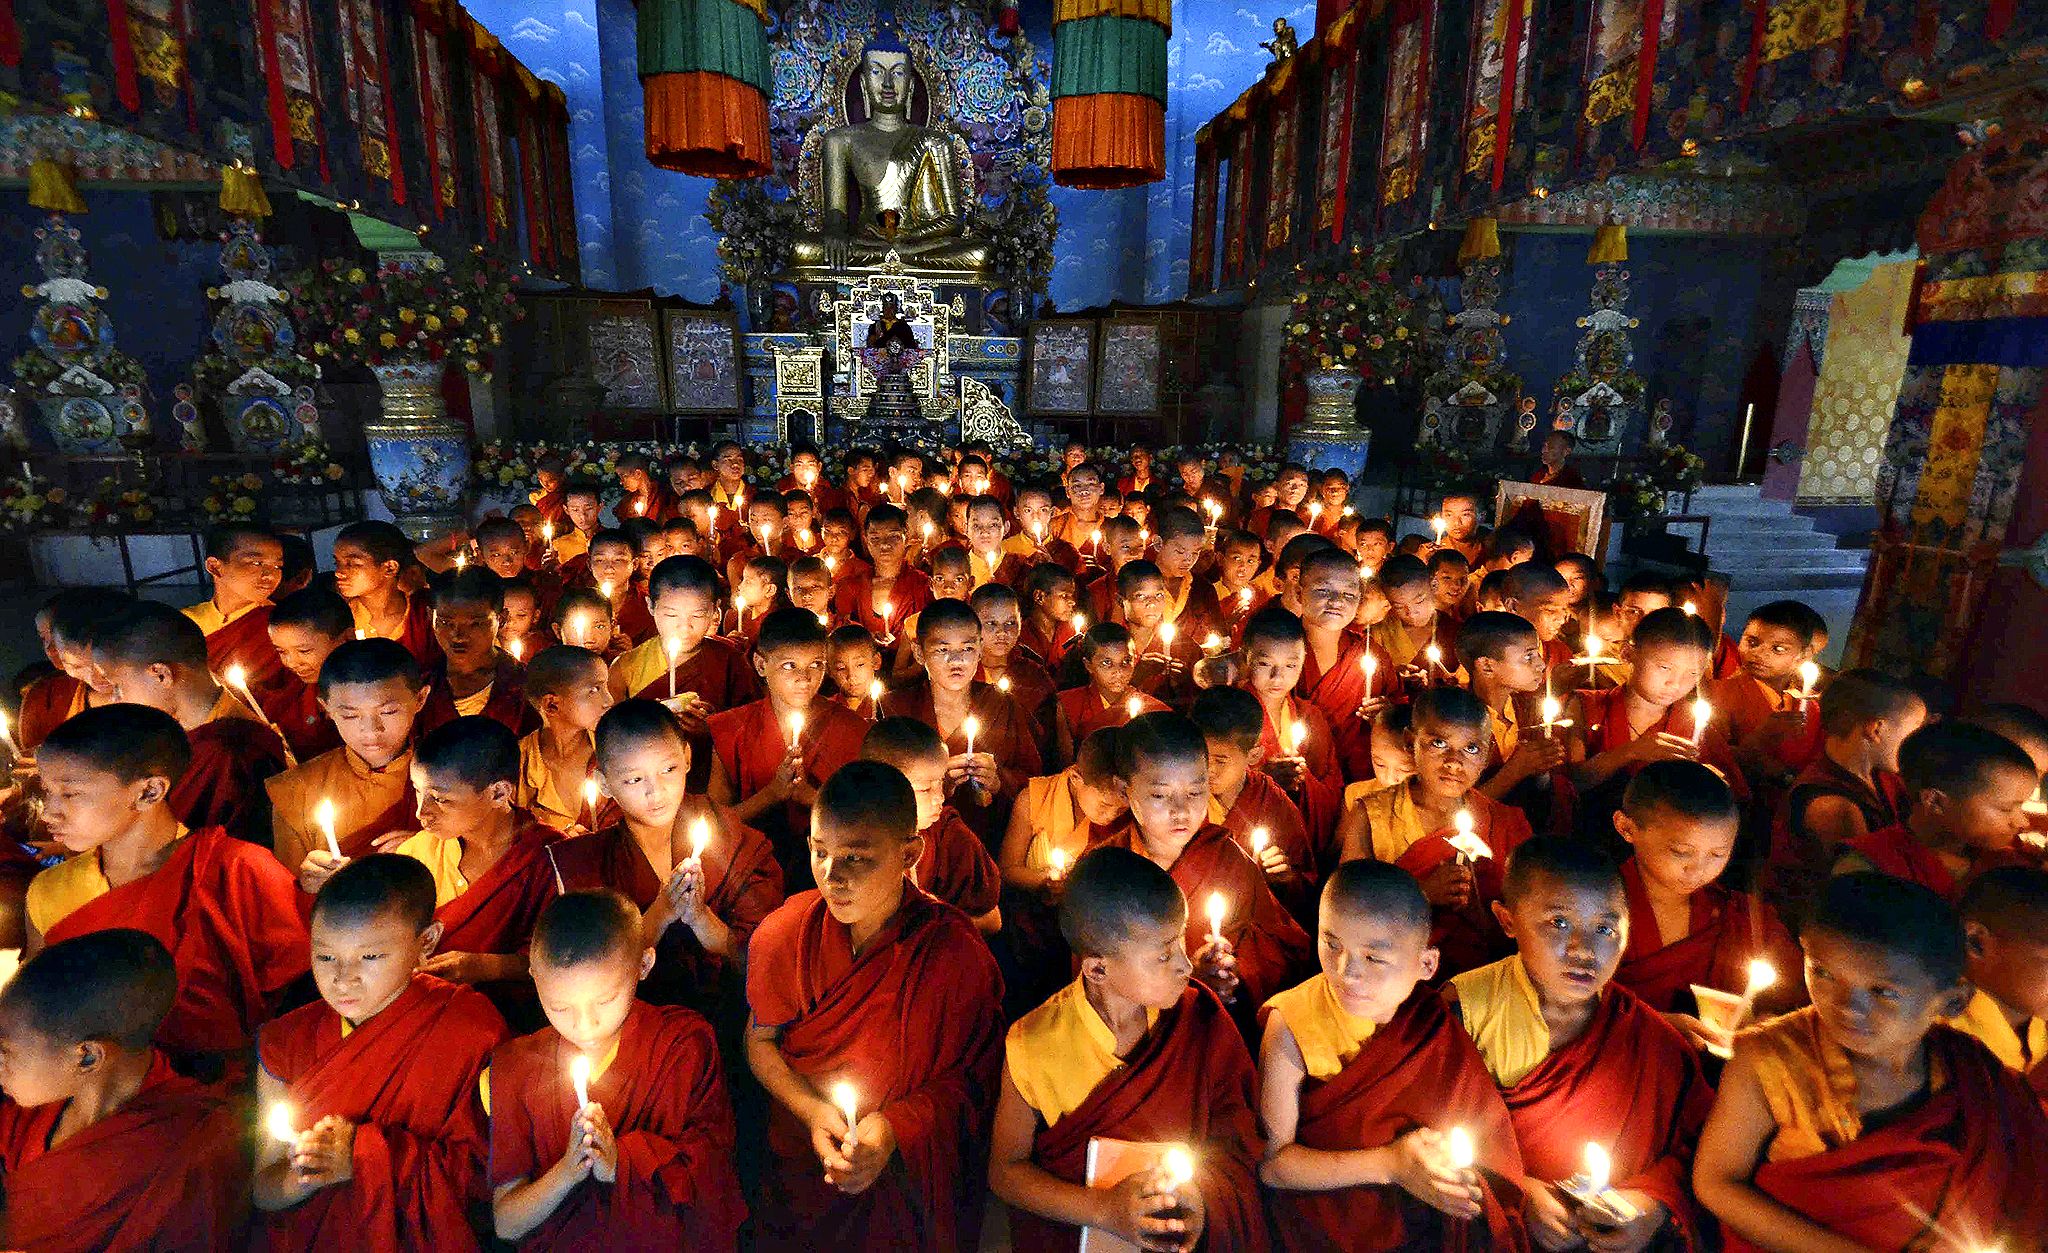 Light the way for peace | My Zen | Pinterest | Photo diary and Buddhism